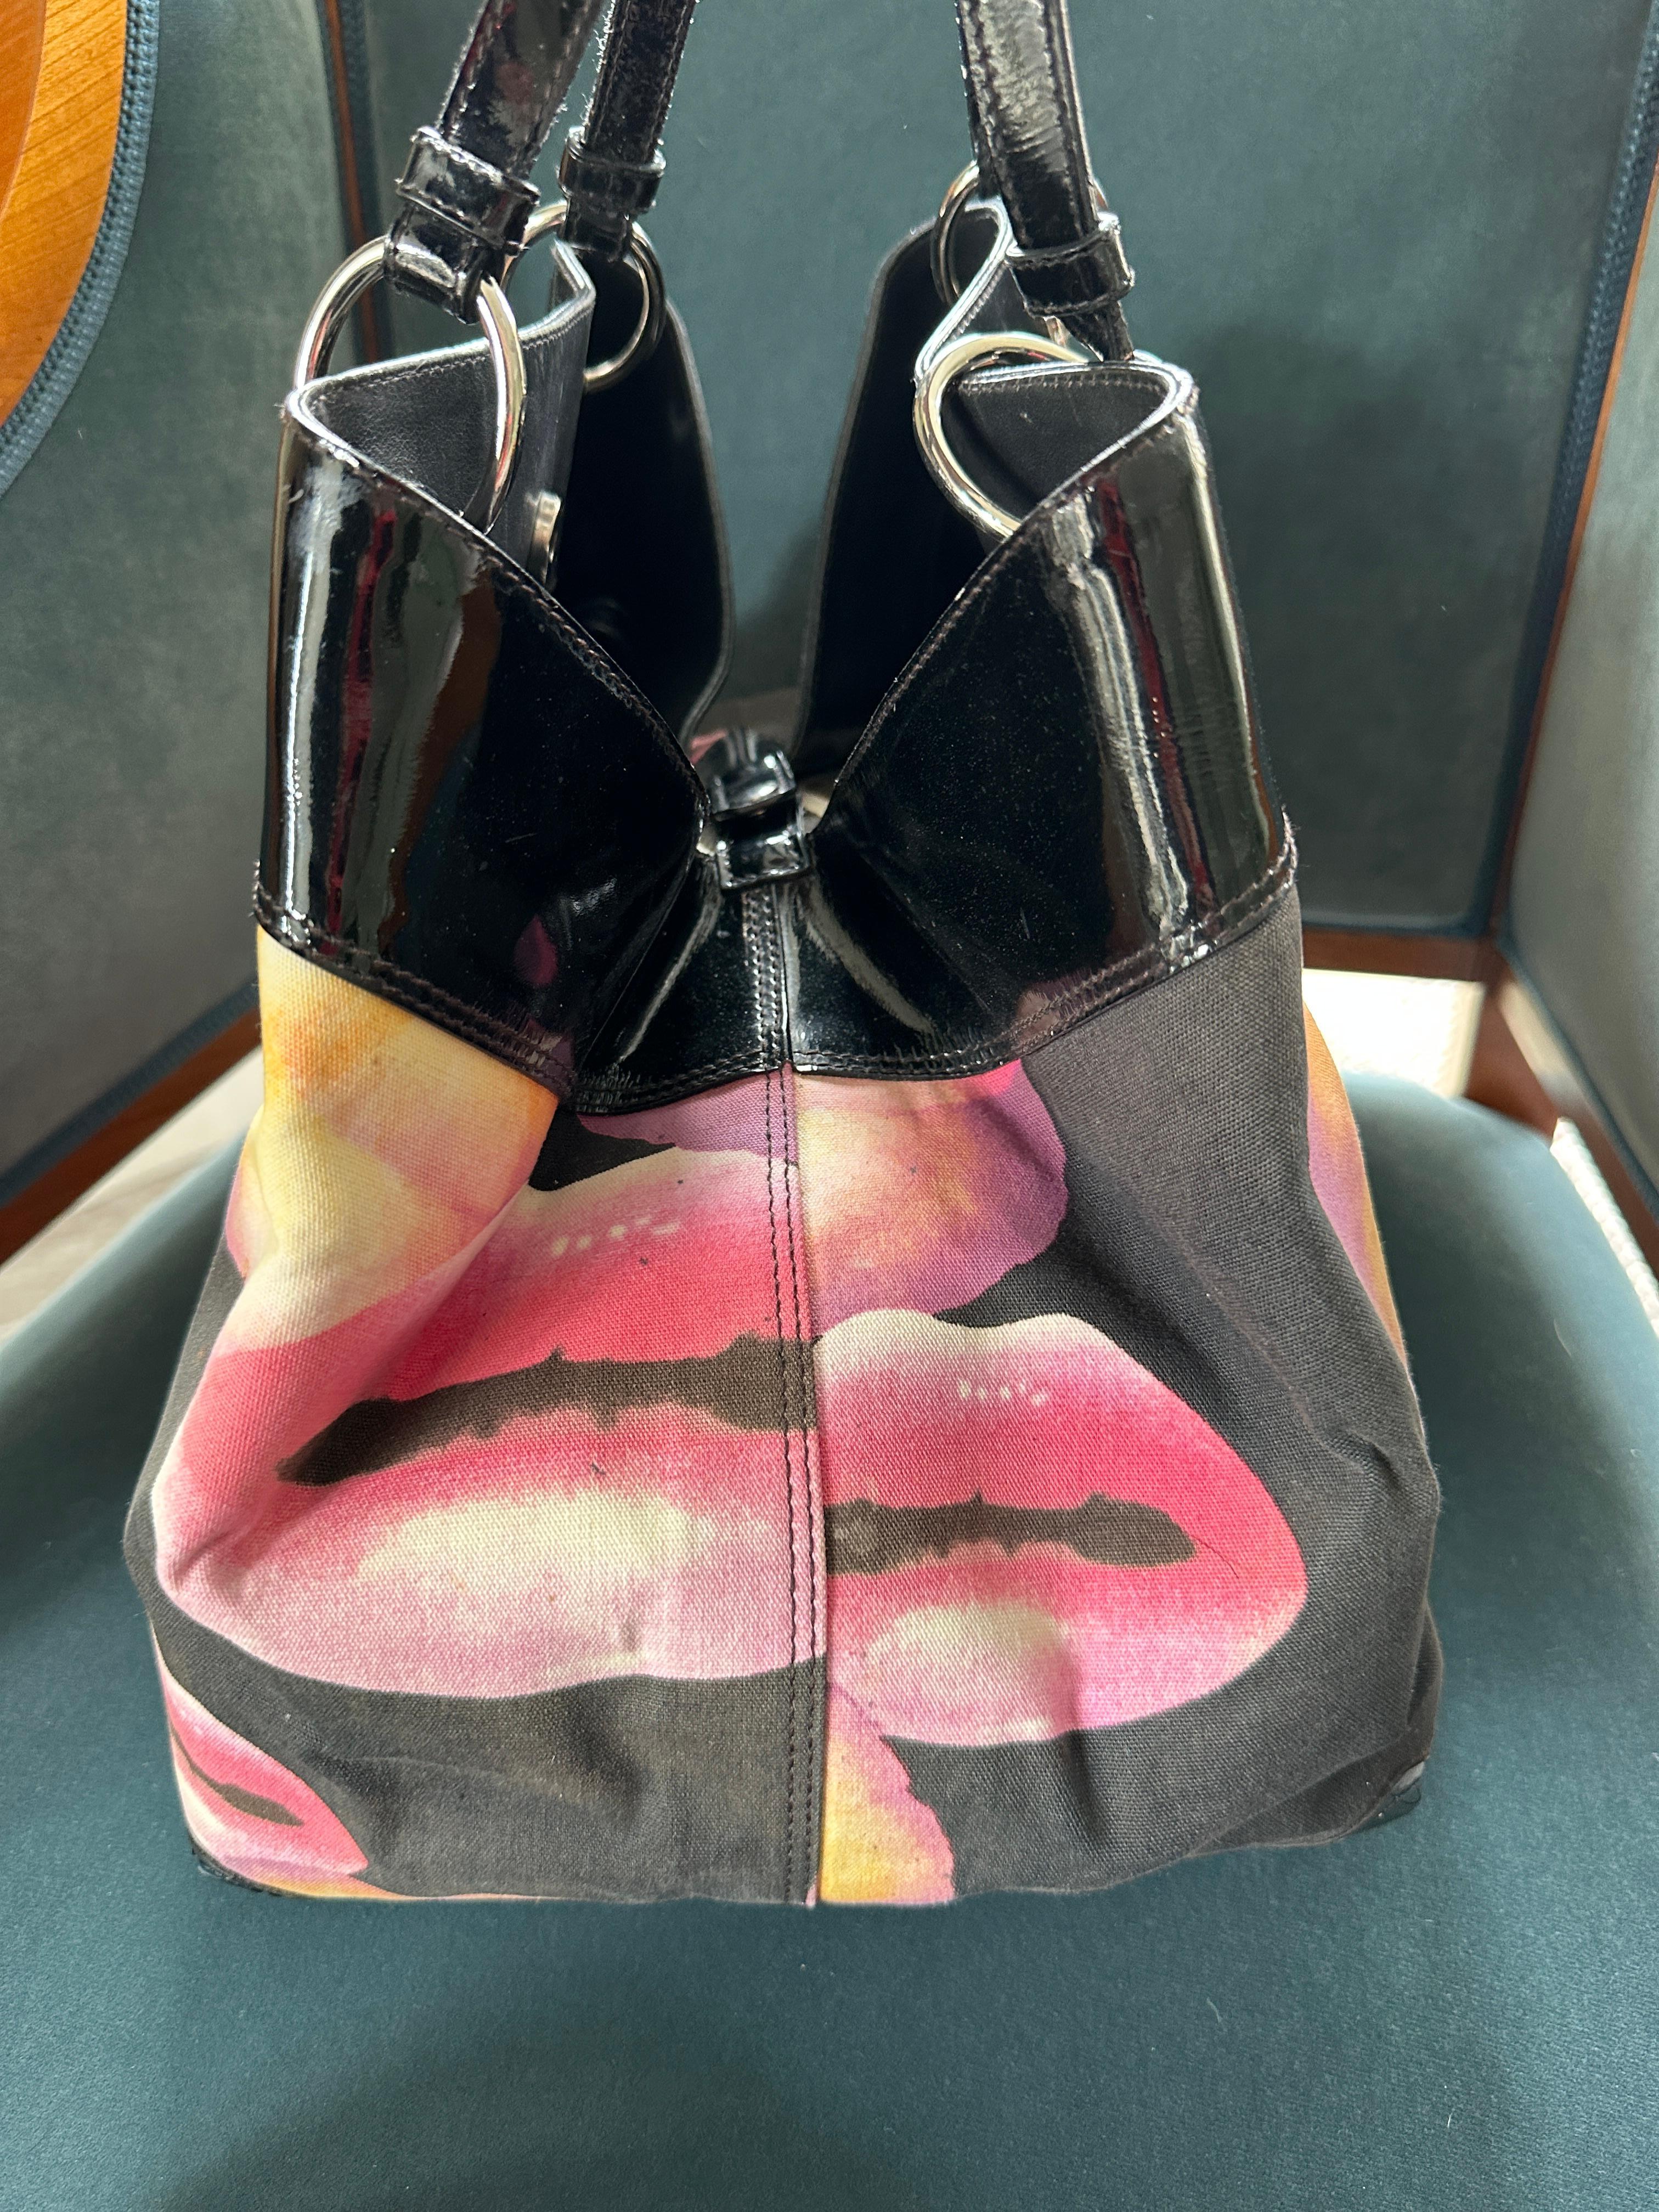 Christian Dior Spring 2005 Surreal Lips and Pansy Print Bag by John Galliano For Sale 3